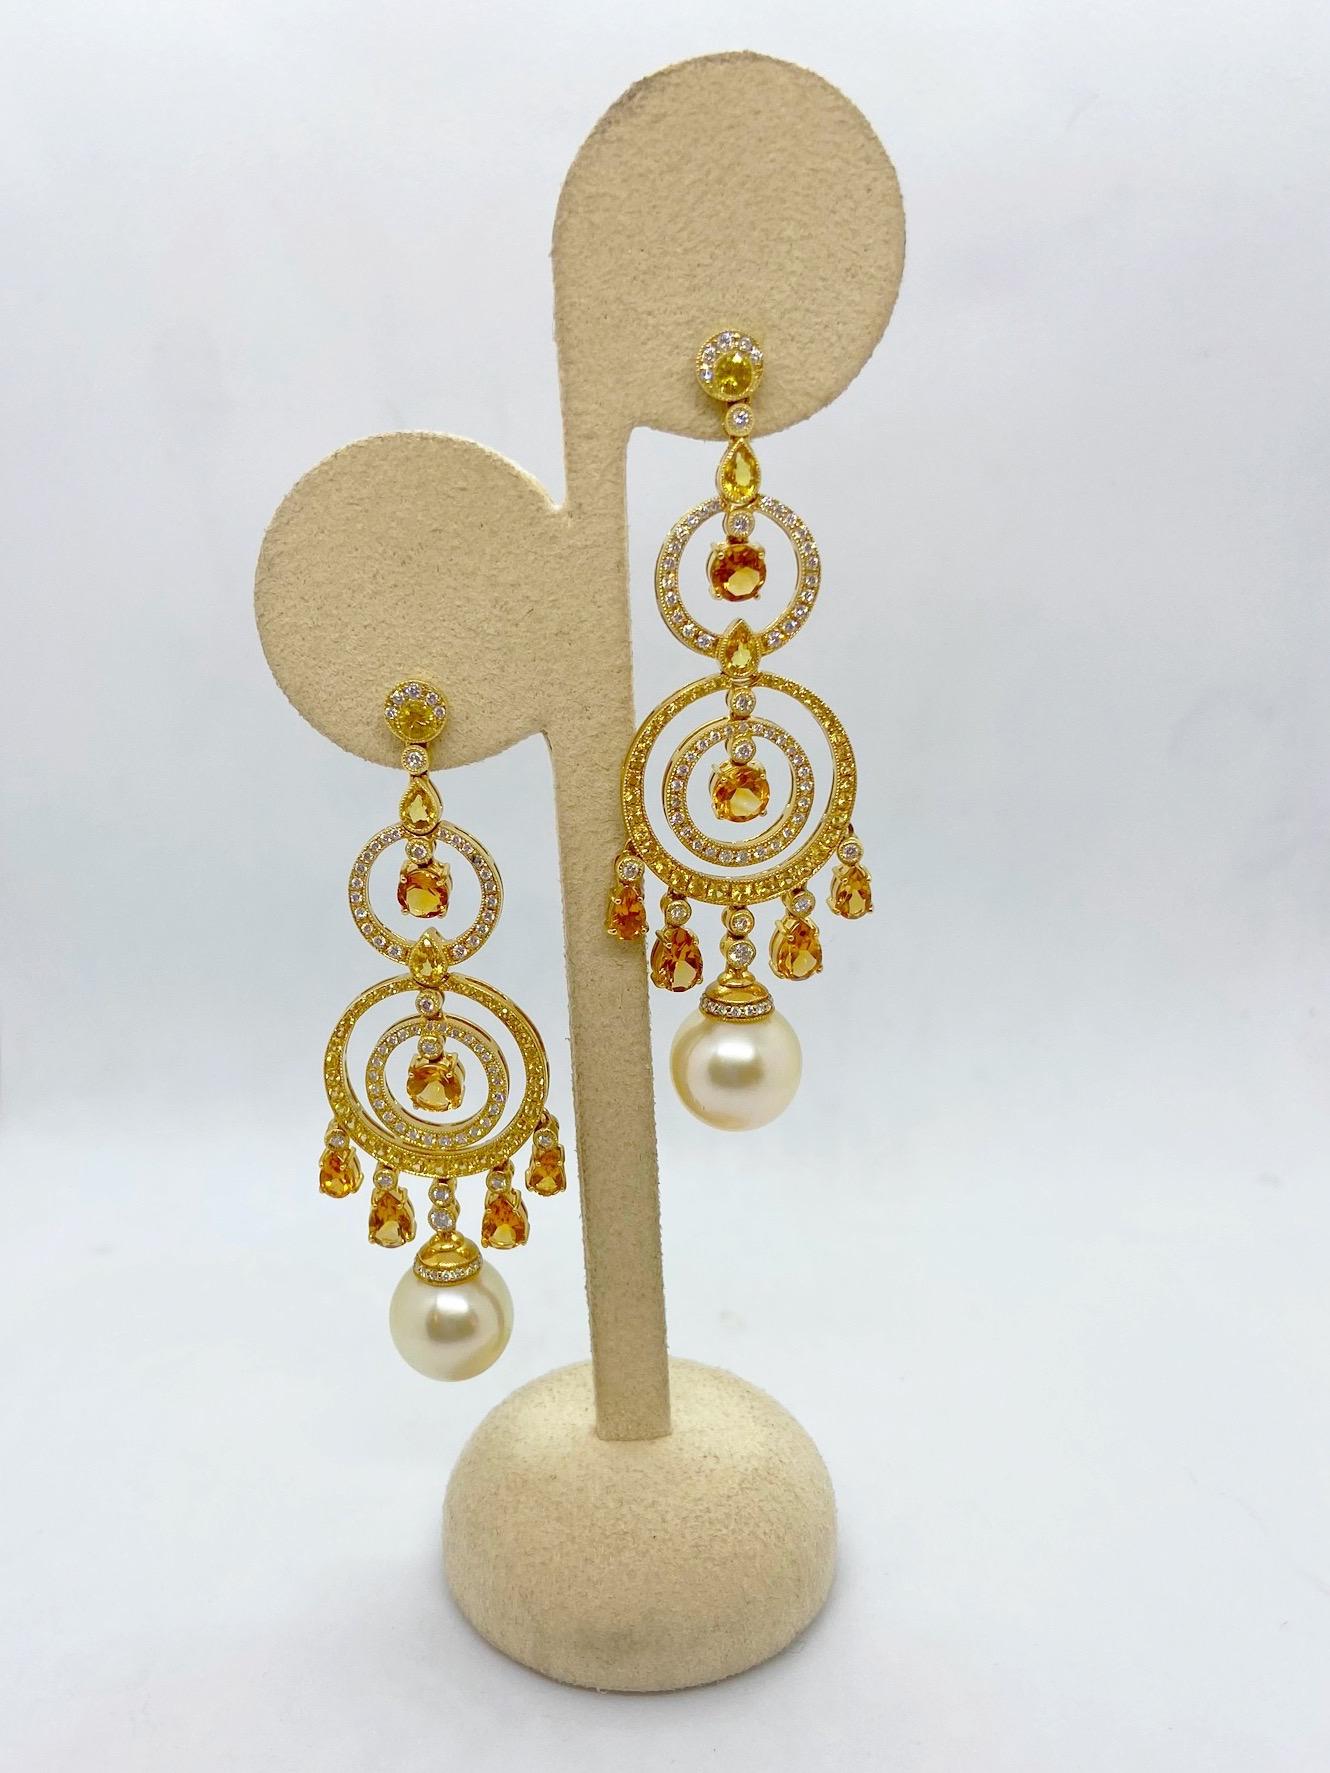 A beautiful pair of 18 karat yellow gold hanging earrings designed with rings of Yellow Sapphires. Pear shaped and round faceted Citrines dangle from bezel set Diamonds. 12mm Golden Pearls hang from the bottom.
The earrings have post backs and are 2